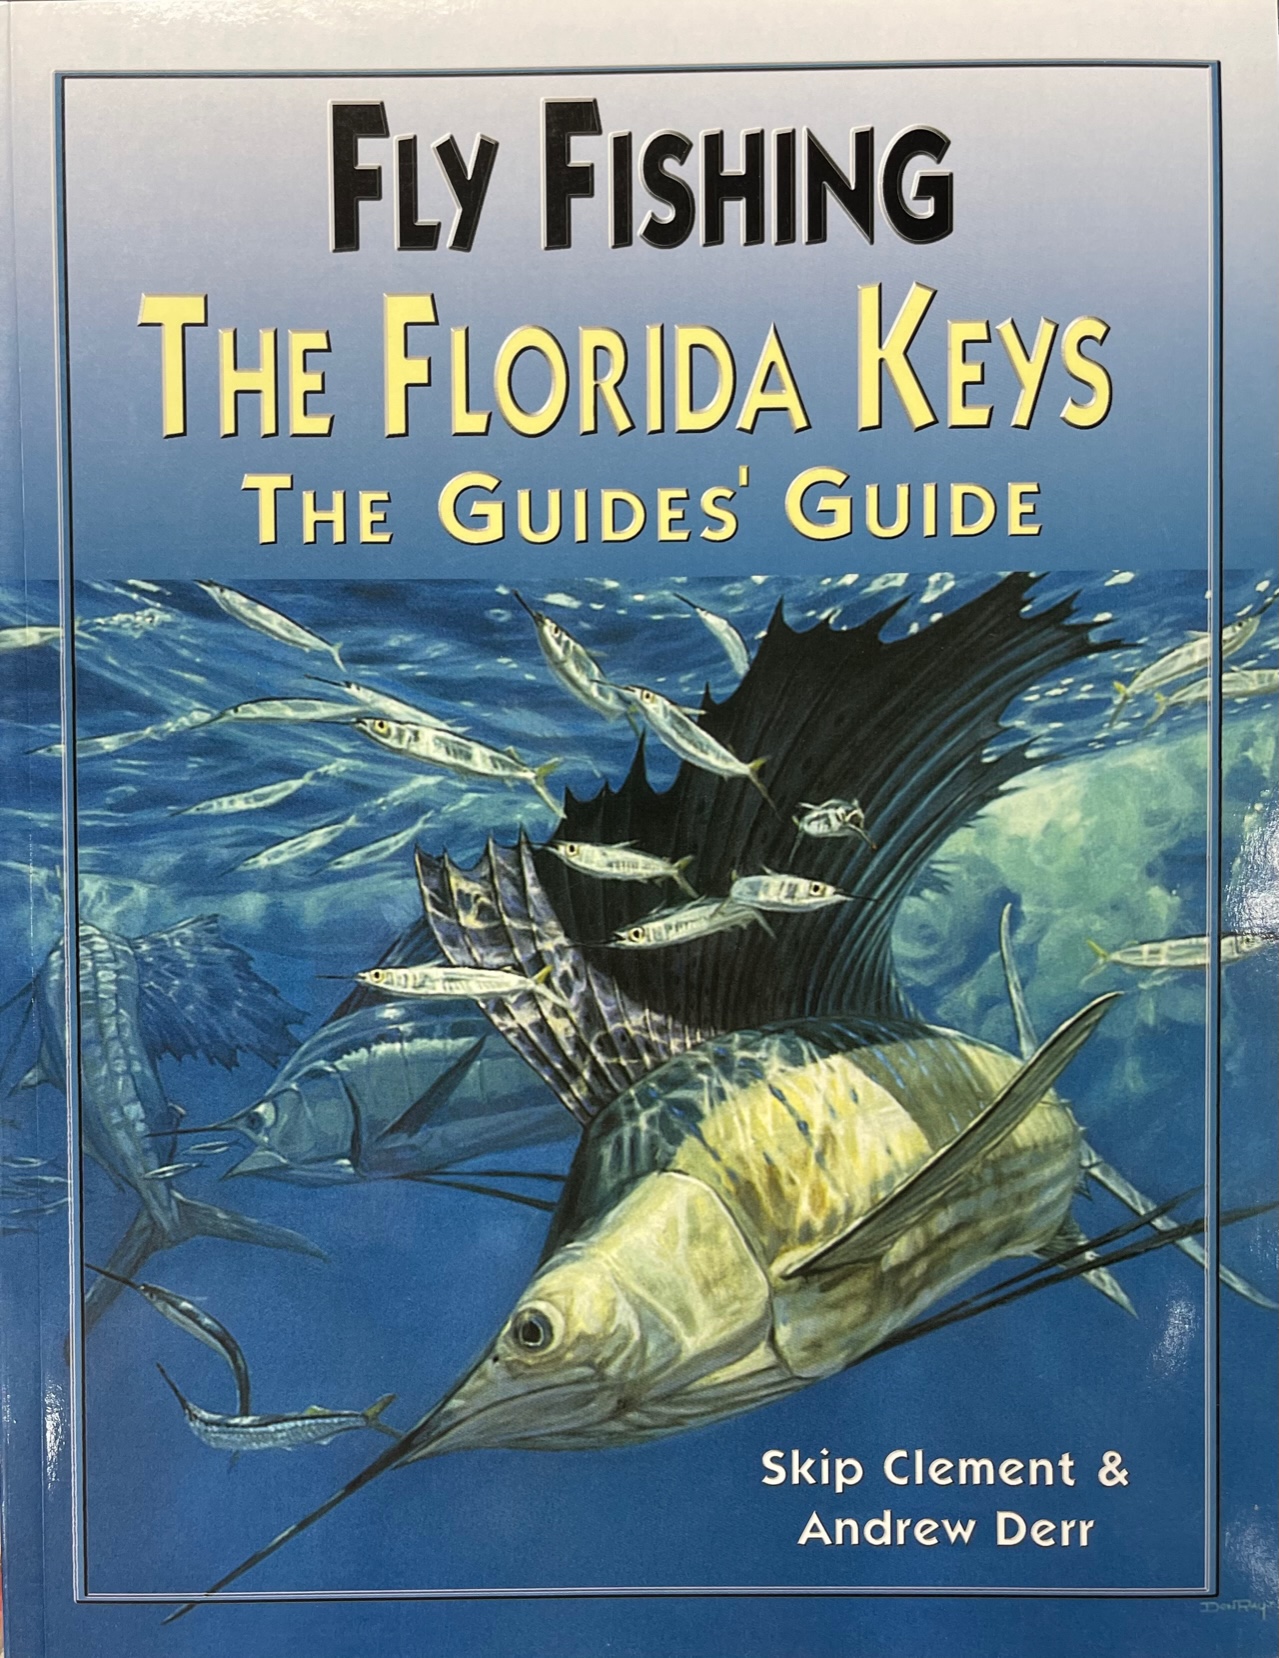 Fly Fishing The Florida Keys - The Guides' Guide